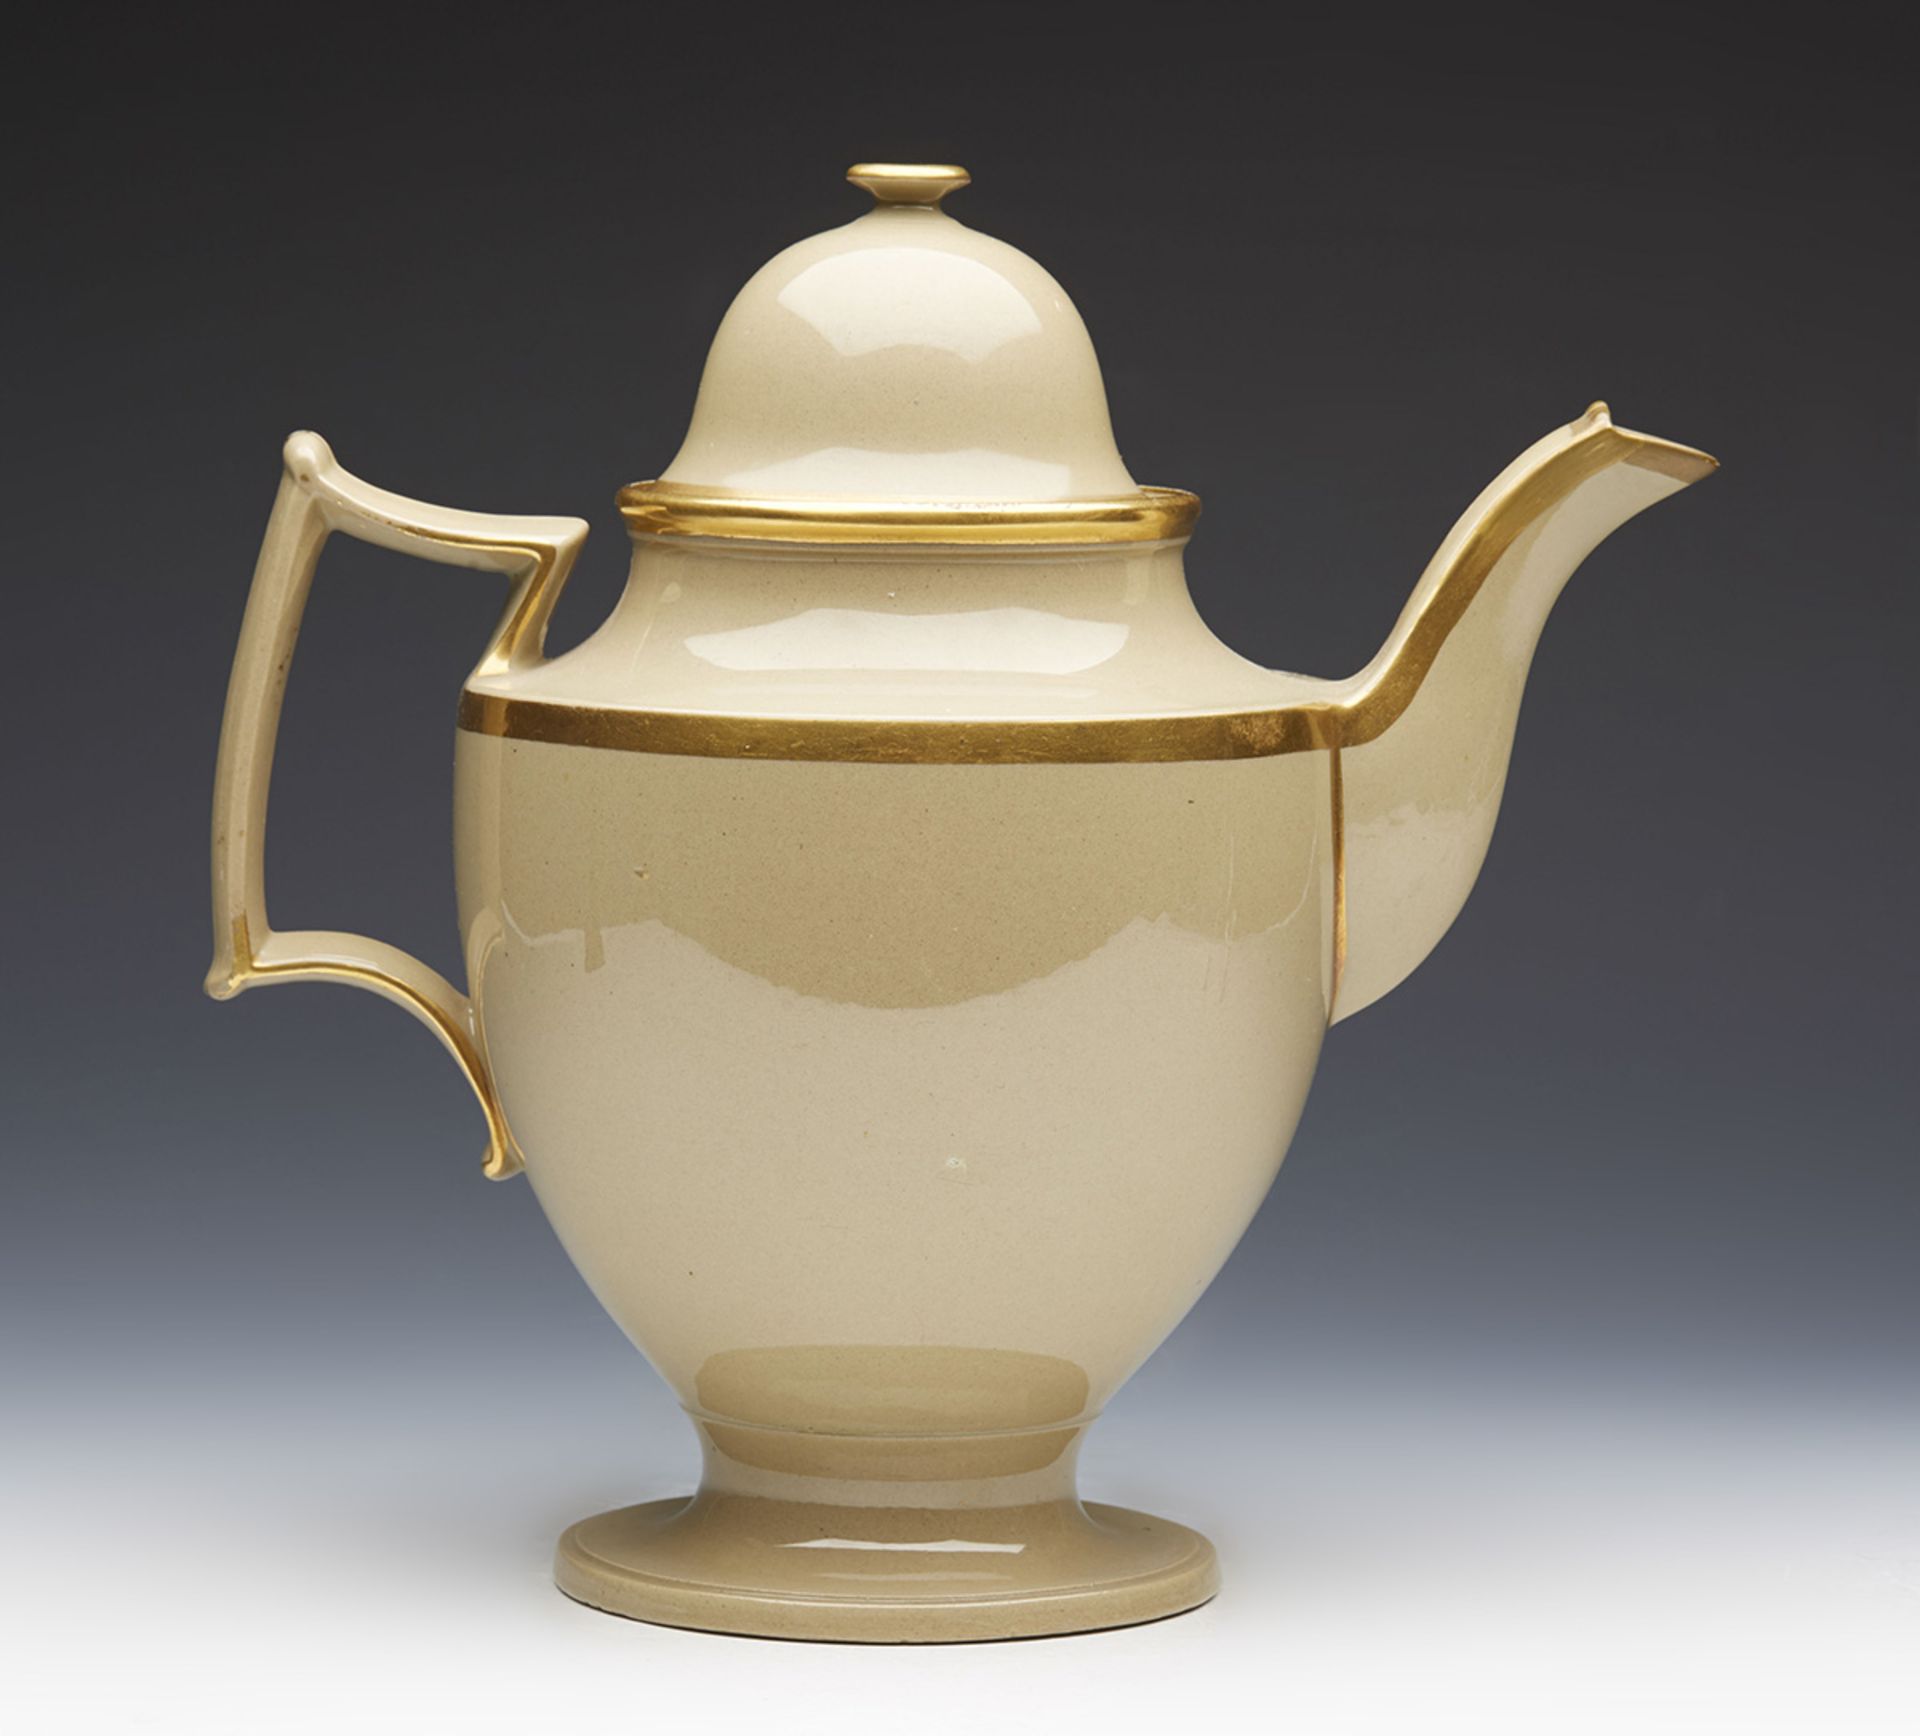 ANTIQUE ENGLISH DRABWARE TEAPOT POSSIBLY SPODE EARLY 19TH C   DIMENSIONS   Height 22,5cm, Width 22,